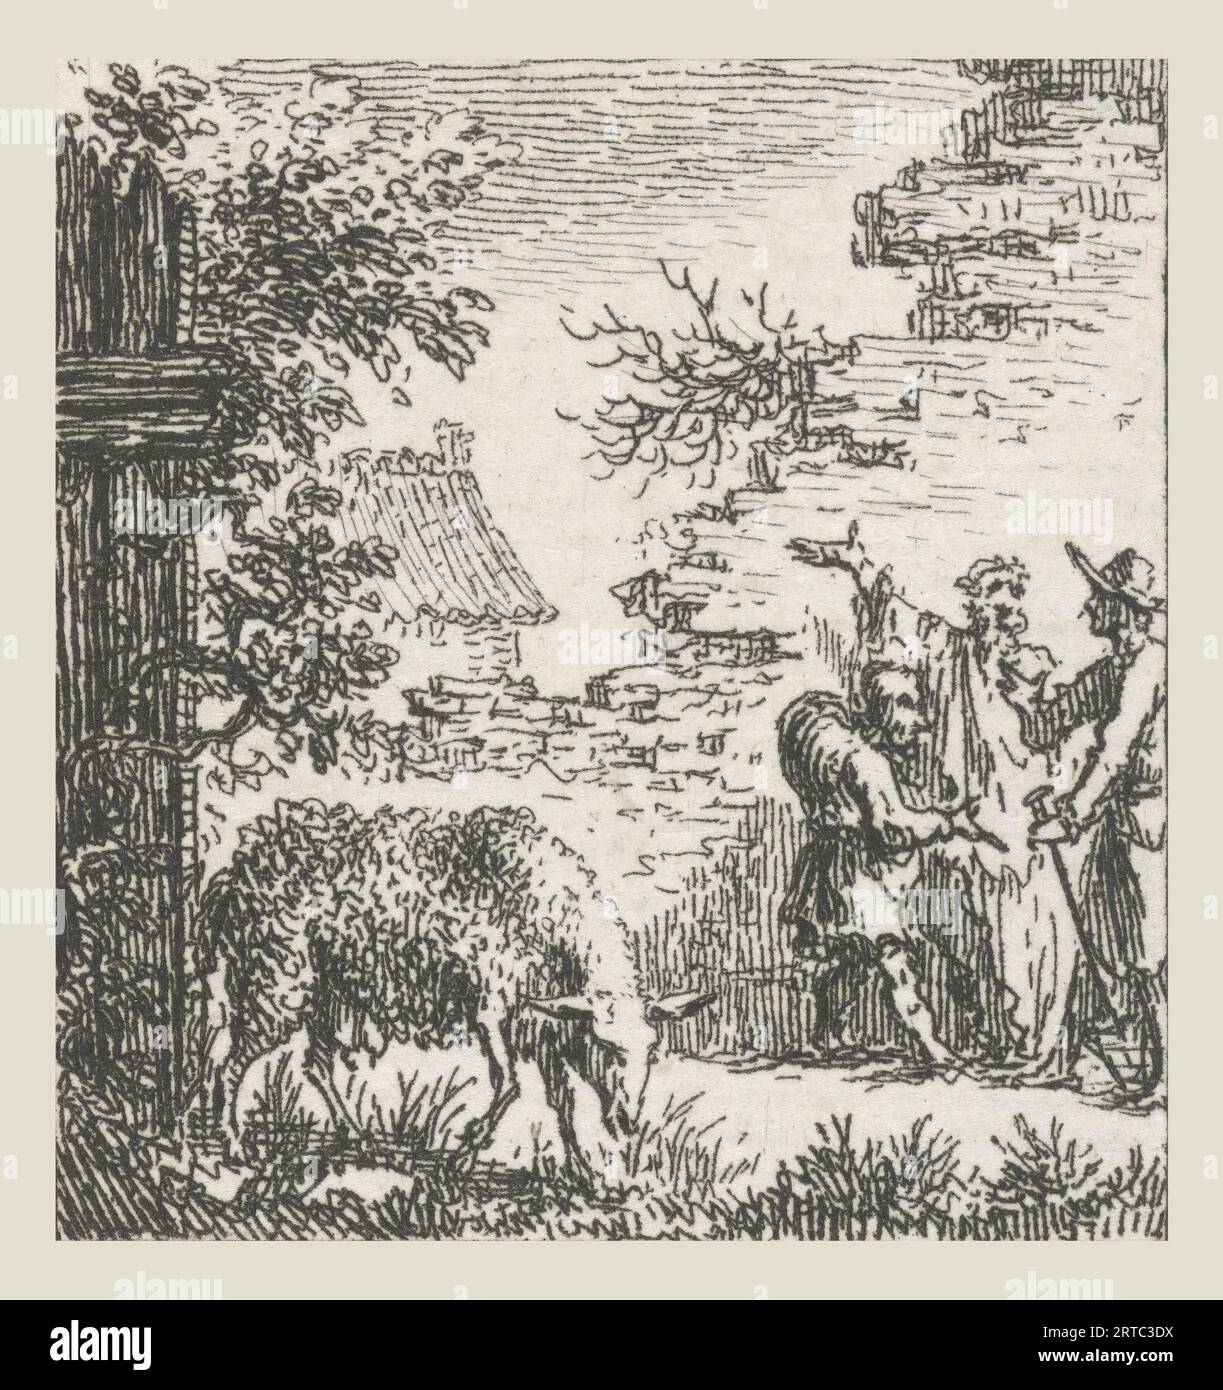 Fable of Aesopus and the Landman, Illustrations for Fable Tales of Phaedrus (series title), Aesopus stands in the middle of two farmers and points a direction with his hand, A sheep is grazing in the foreground, This illustration was made in the Aesopian fables of the Latin poet Phaedrus, fables. Simon Fokke (1712-1784) was a Dutch designer, etcher, and engraver. Born in Amsterdam, The Netherlands. Discover the enchanting world of Phaedrus' fables, where timeless wisdom meets captivating storytelling. In 'The Fables of Phaedrus,' you'll embark on a journey through vivid landscapes Stock Photo